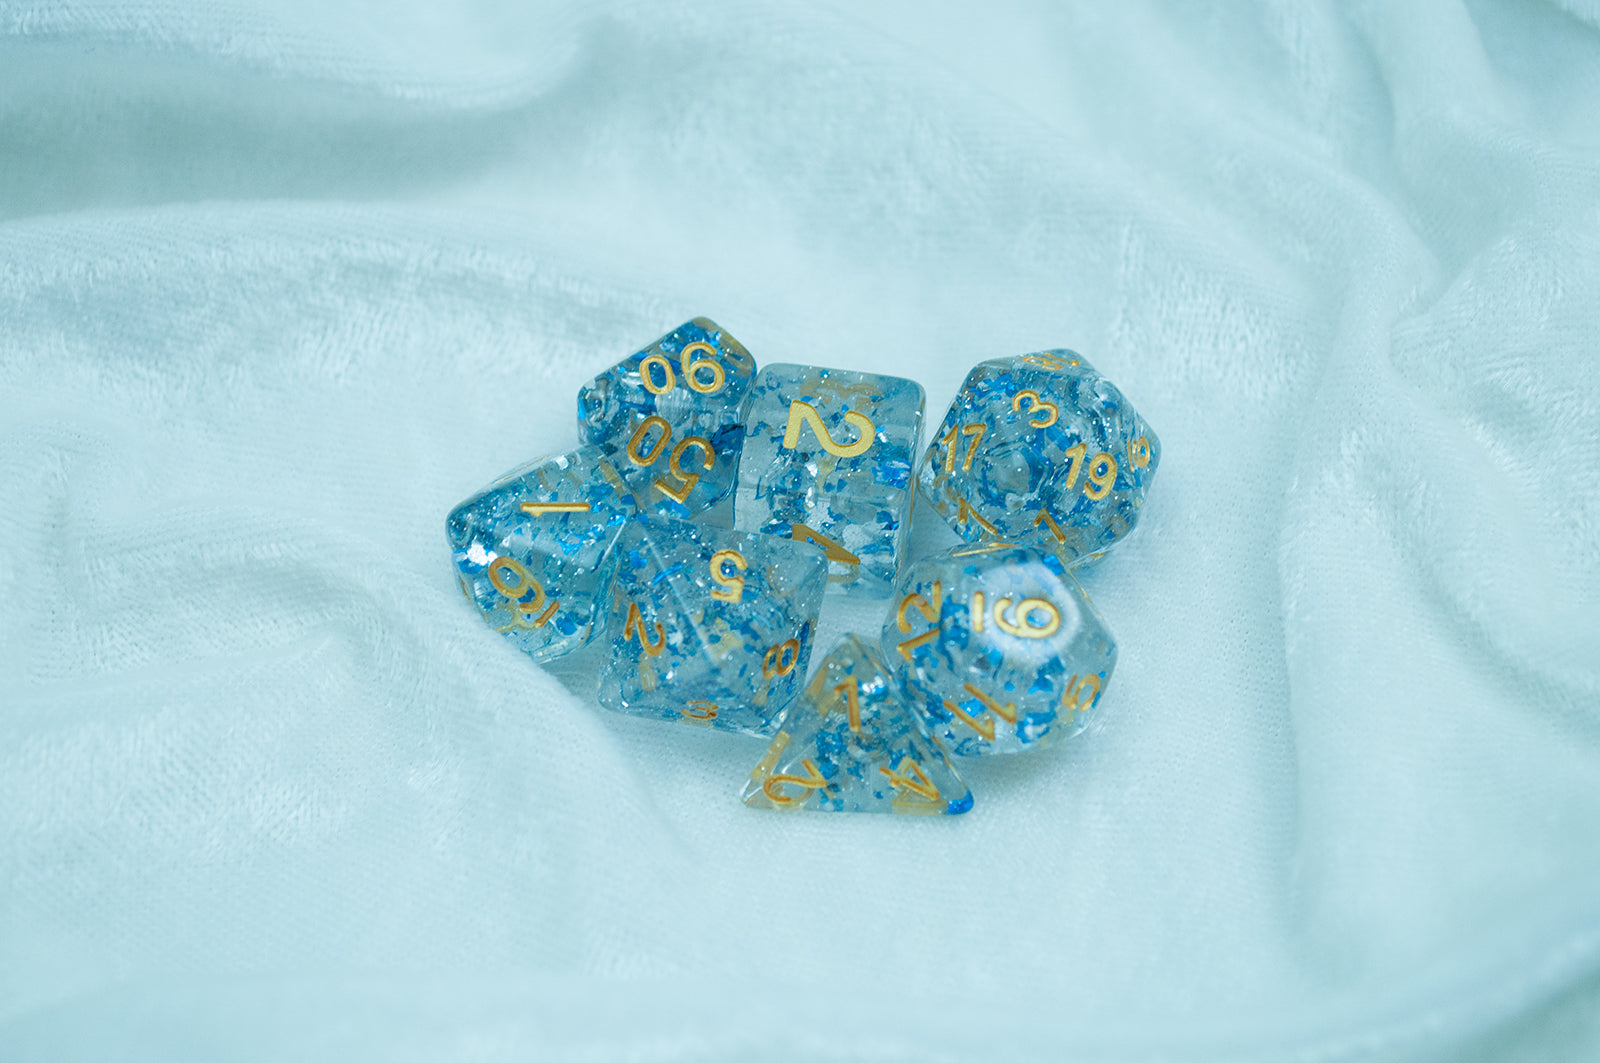 The Metallic Sapphire 7 piece dice set from Tabletop Loot with blue metallic flakes suspended in clear resin with glitter and gold numbering.